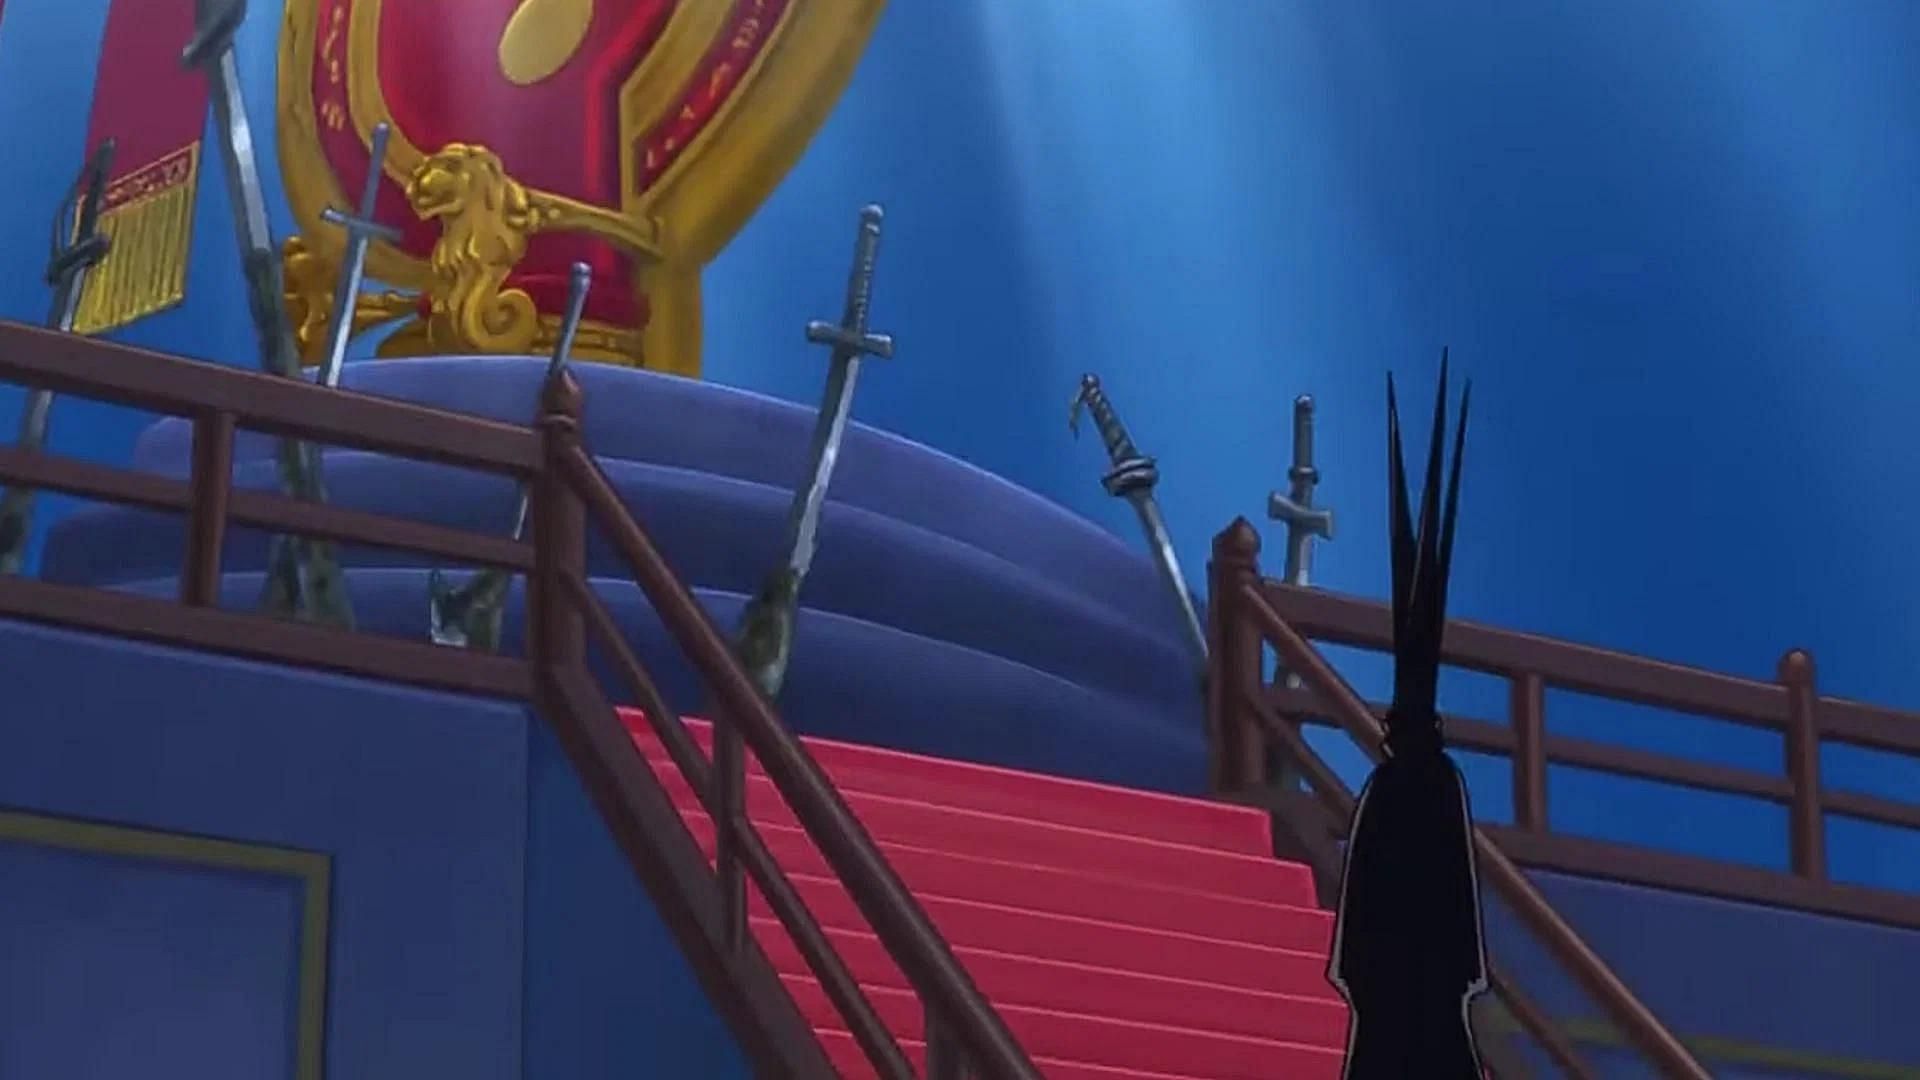 Imu as shown in the One Piece anime series (Image via Toei Animation)